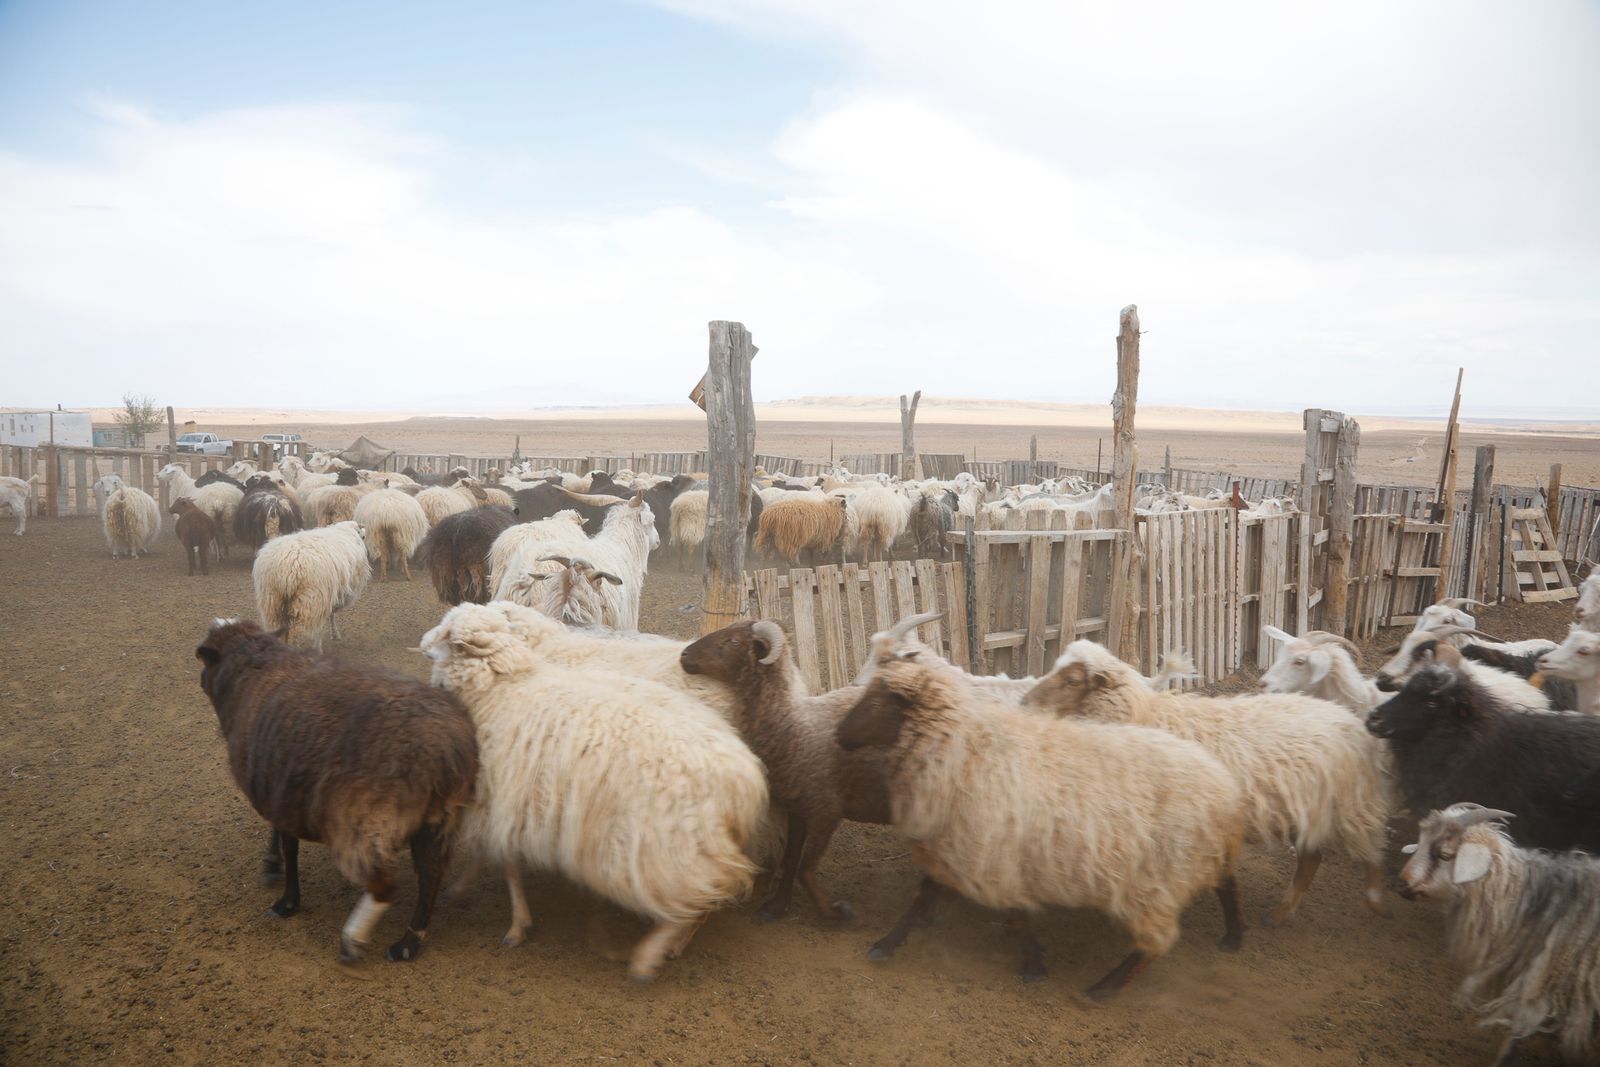 © Julien McRoberts - Over 300 sheep come back to the pen and get sheared over 4 - 5 weekends in late spring